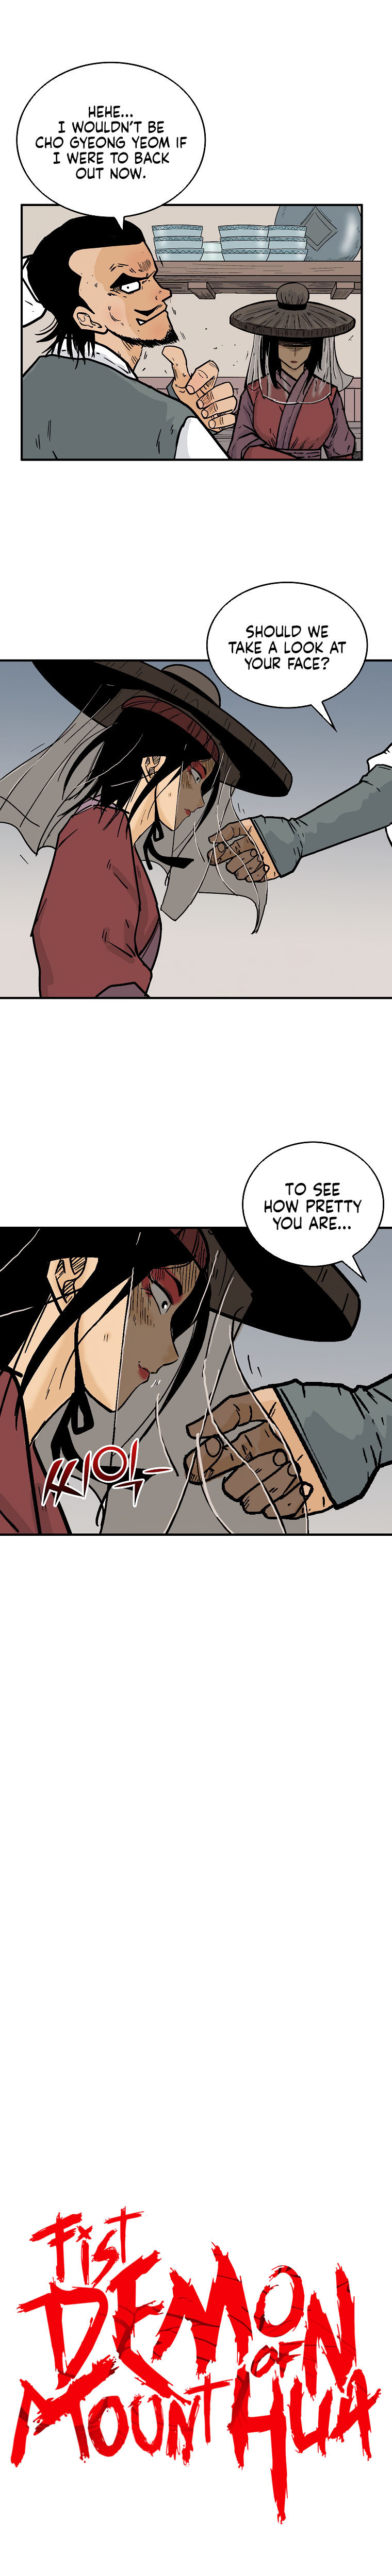 Fist demon of Mount Hua - Chapter 107 Page 1